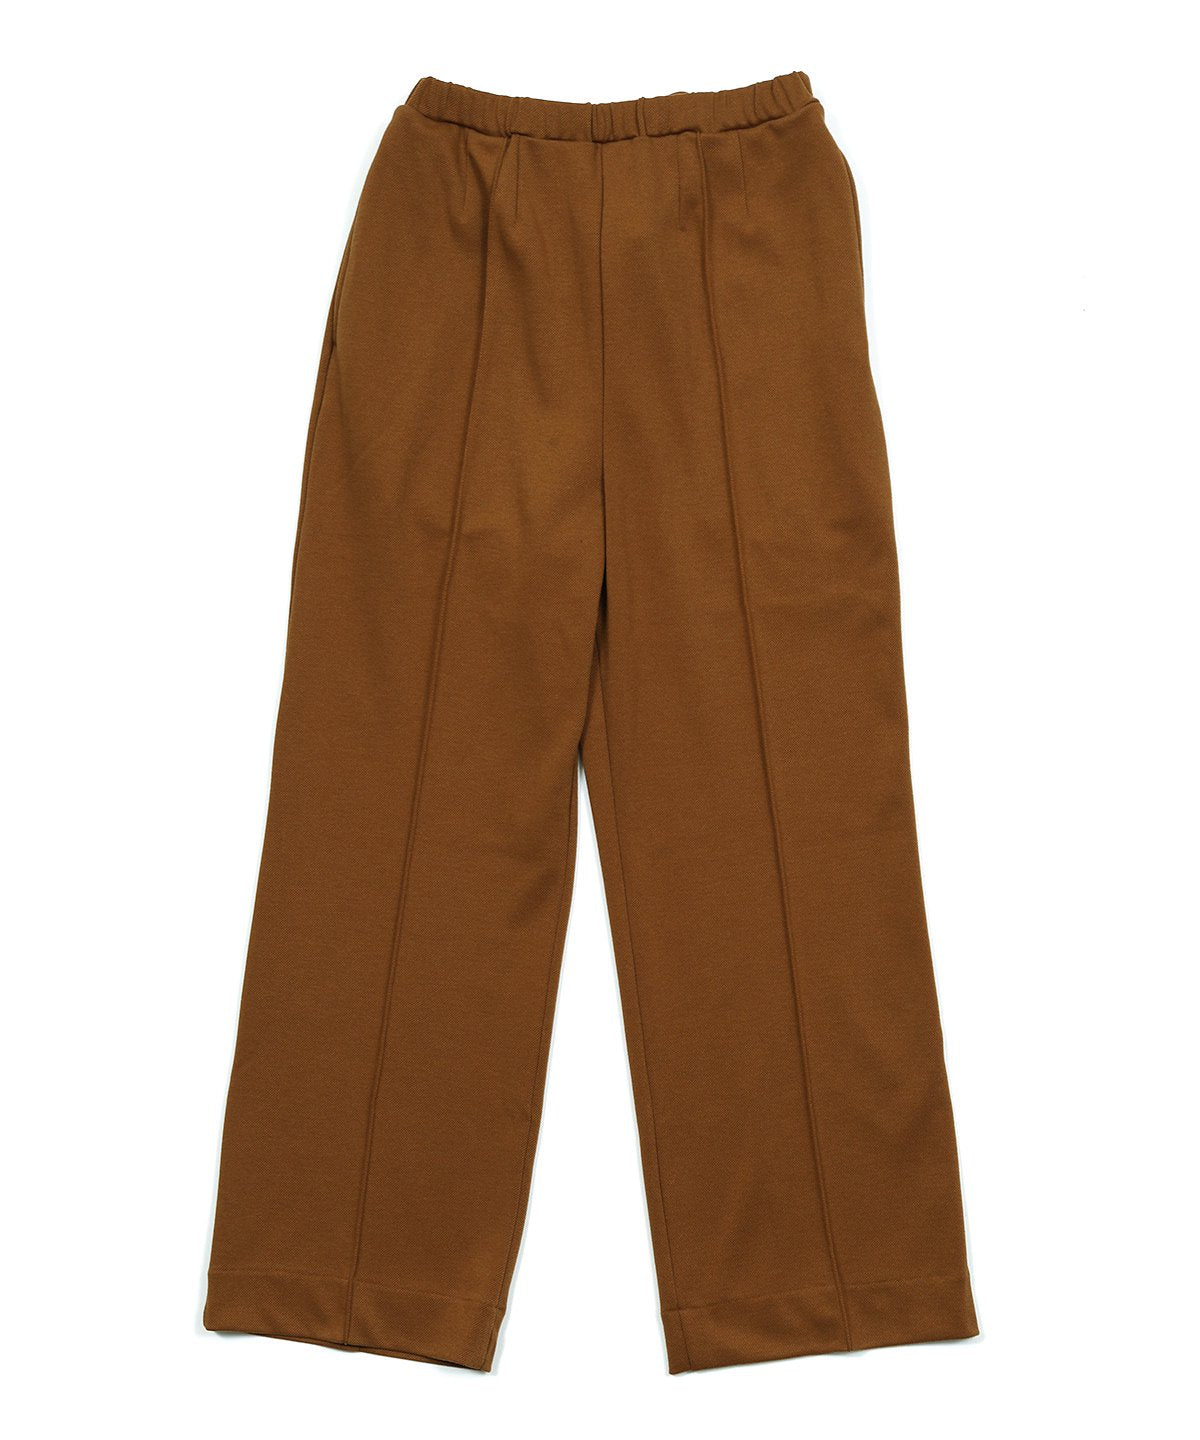 Undyed Organic Cotton Drawstring Tapered Pants – 11.11/eleven eleven